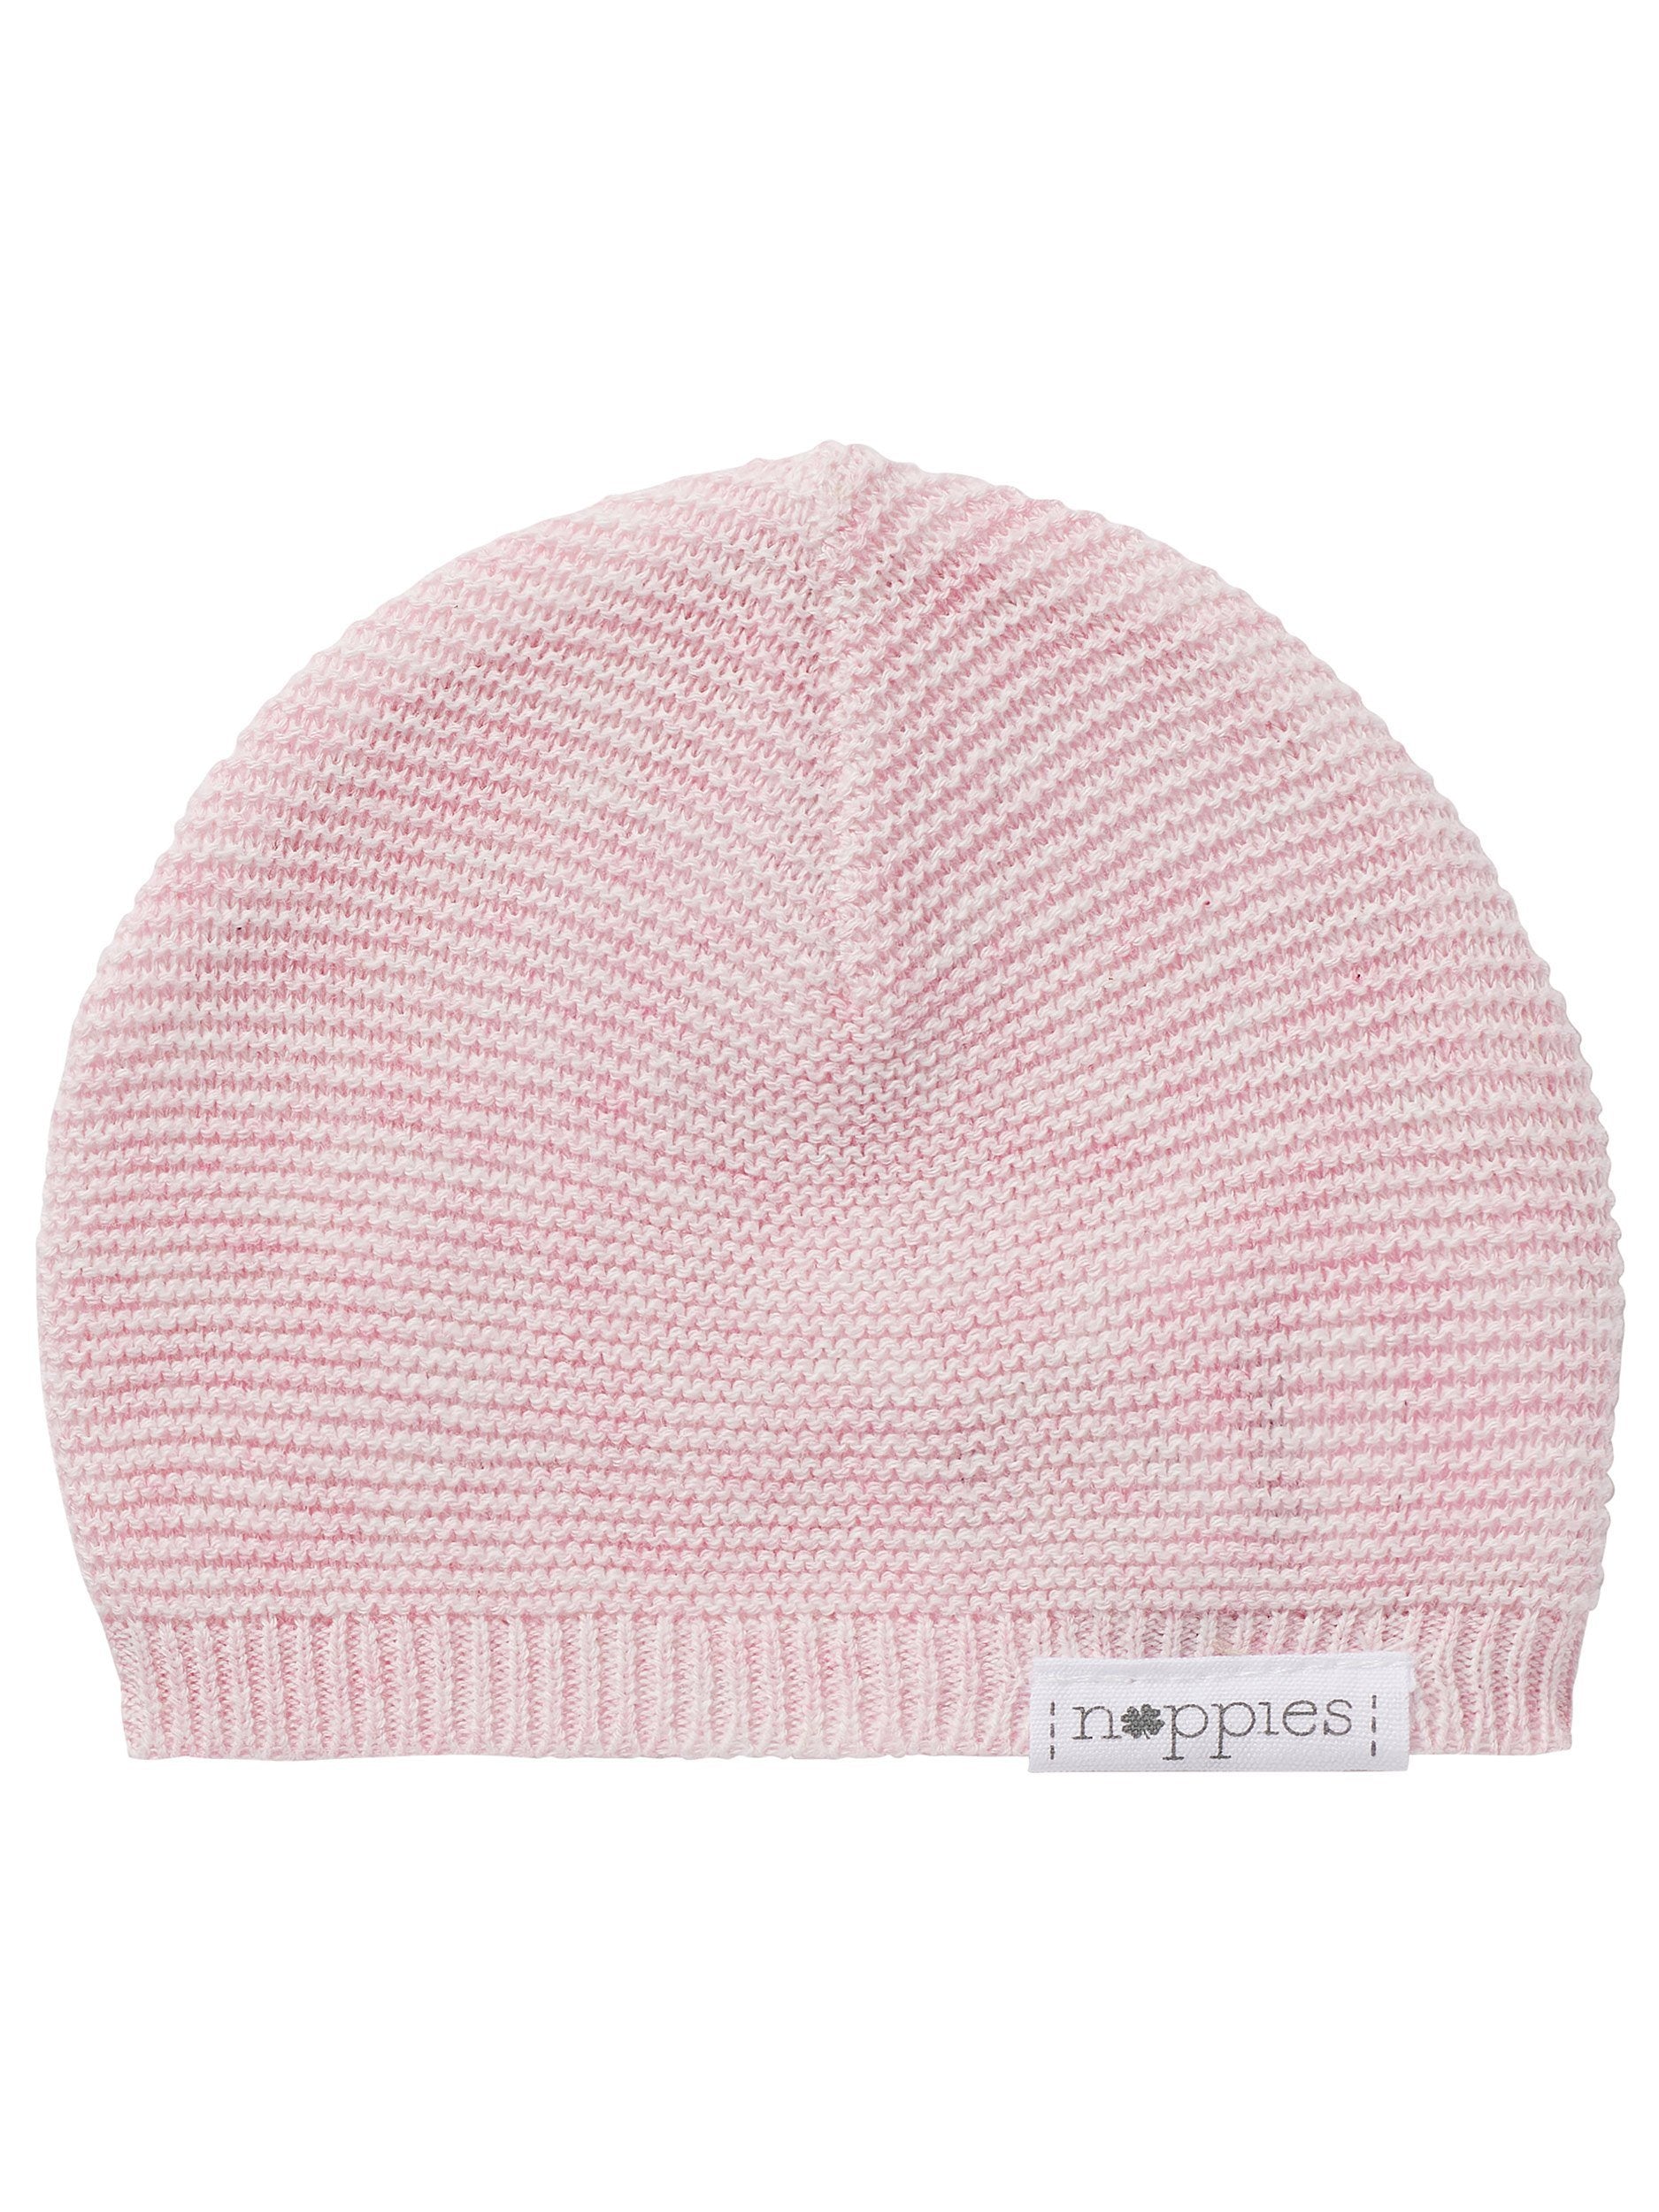 Organic Cotton Knitted Hat - Pink - Hat - Noppies